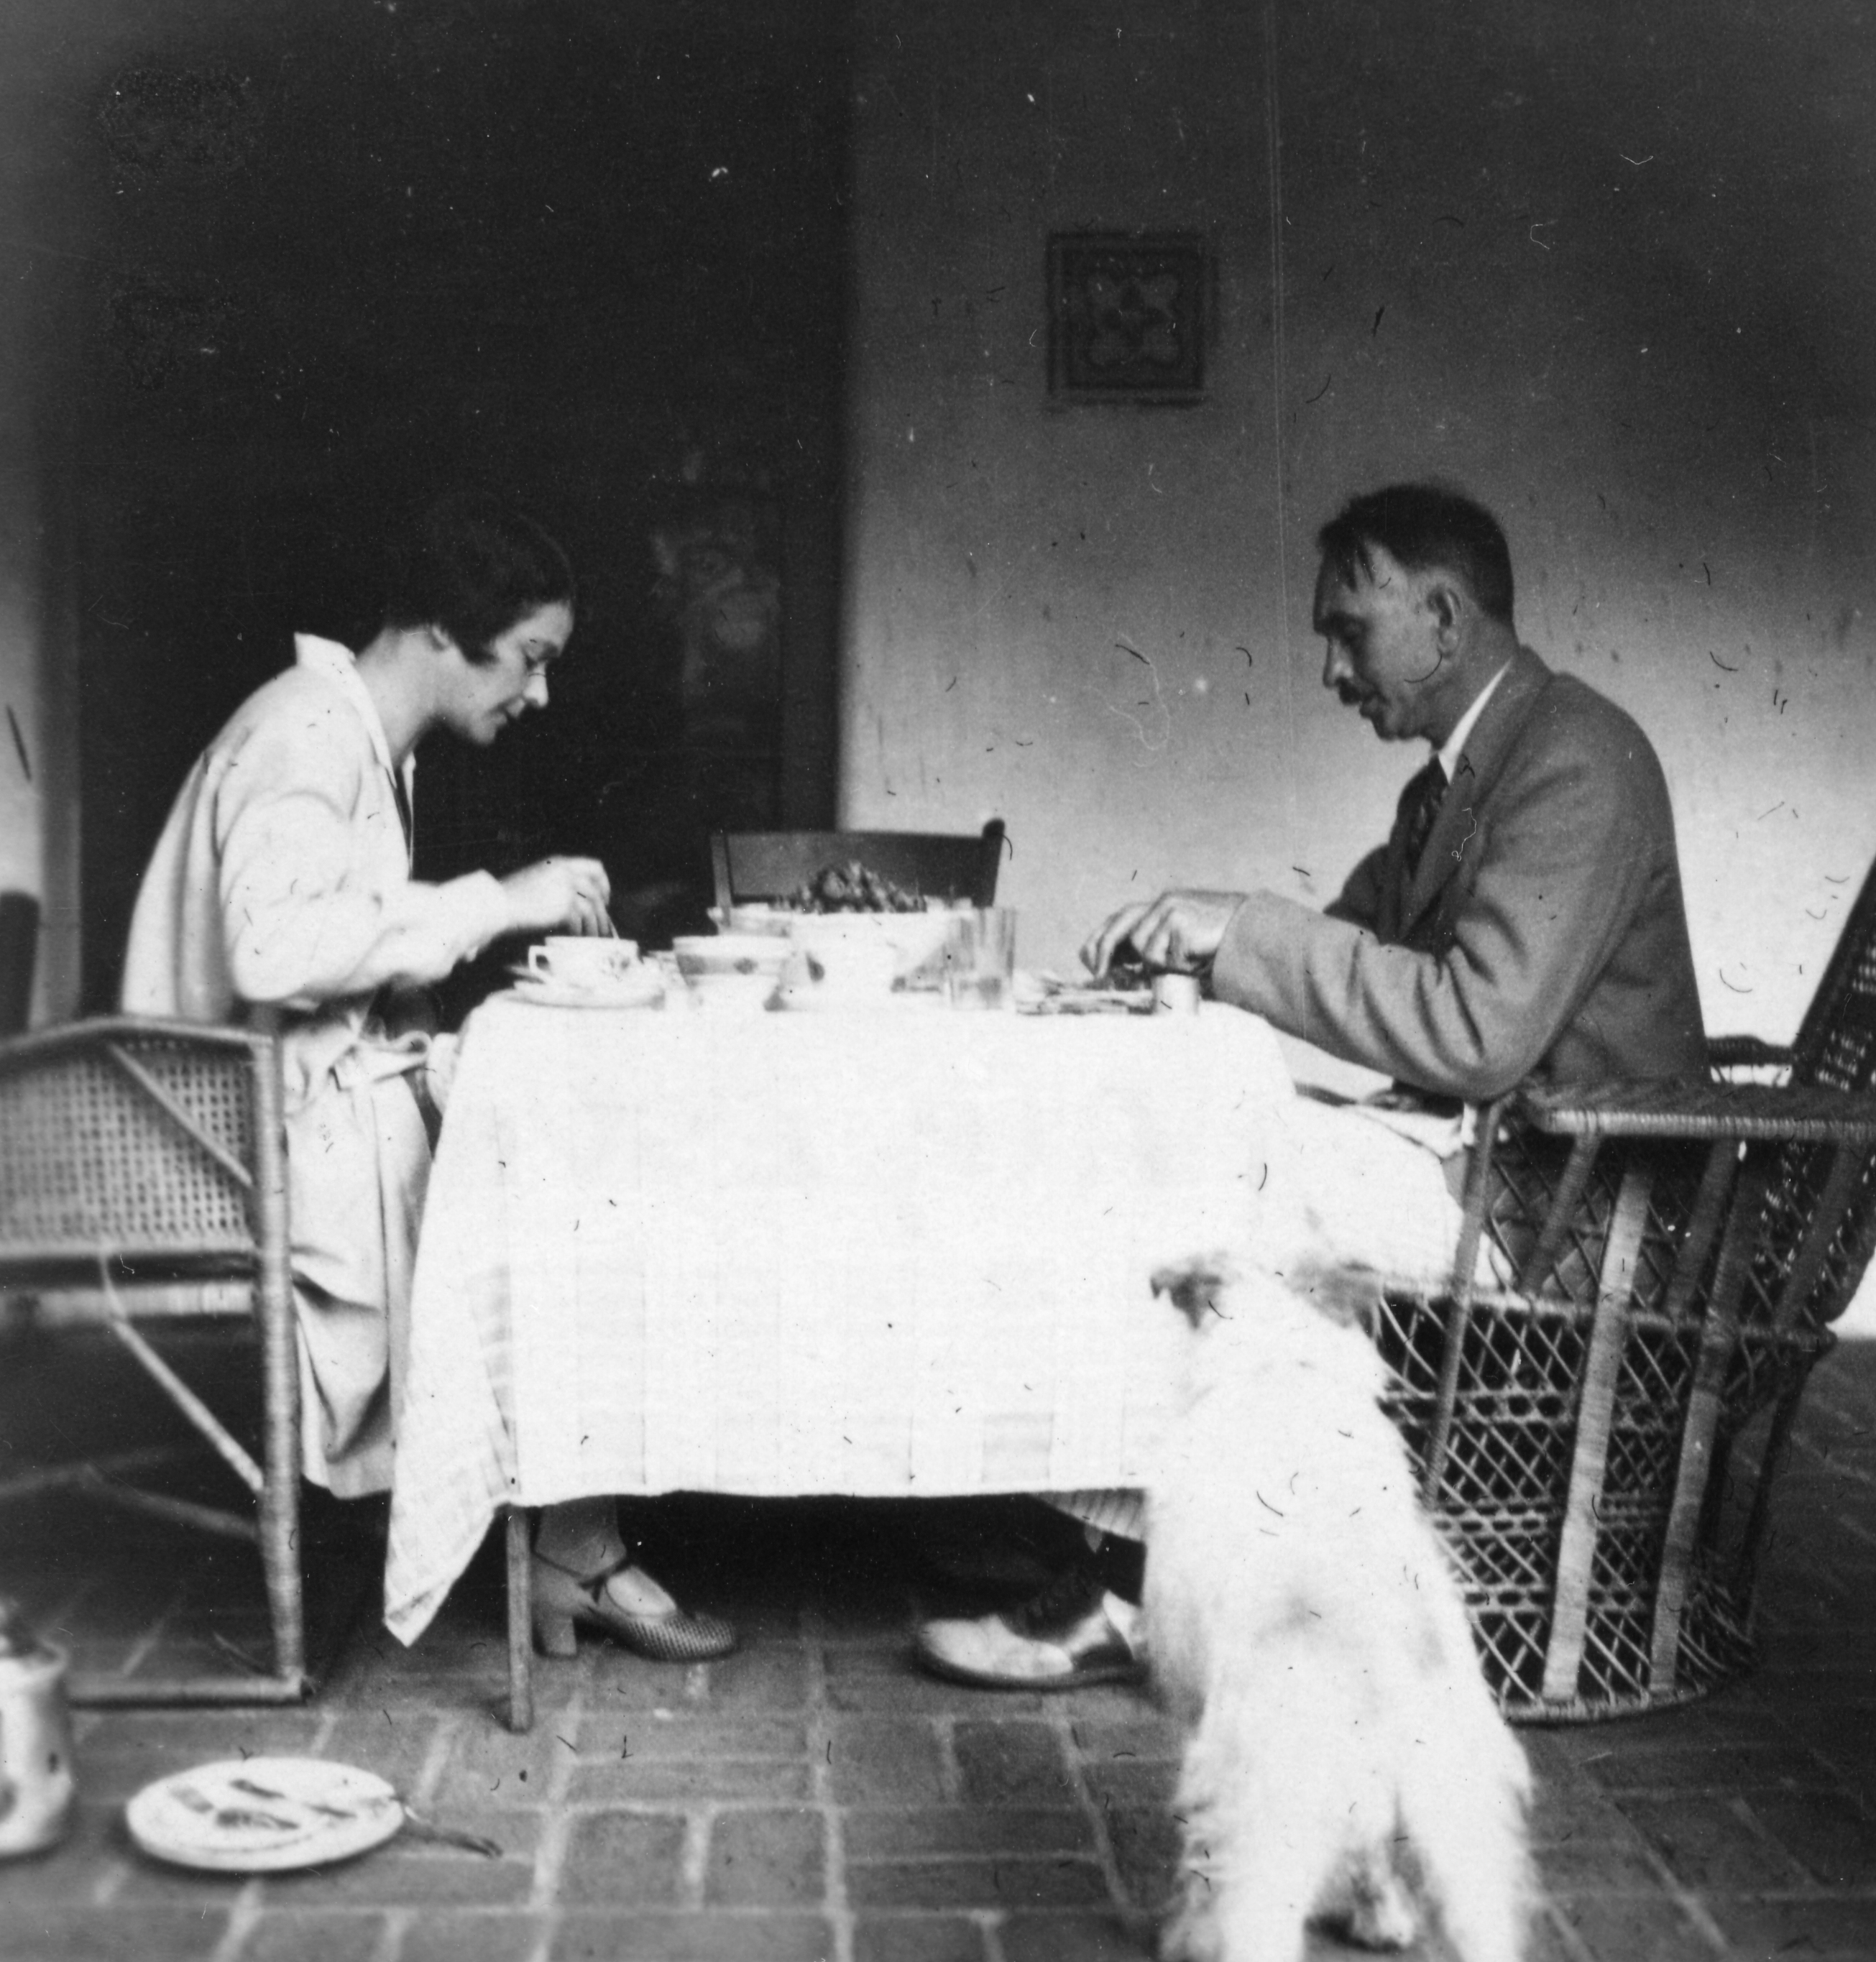 Ruth and Richard Tolman eating outside with their dog nearby